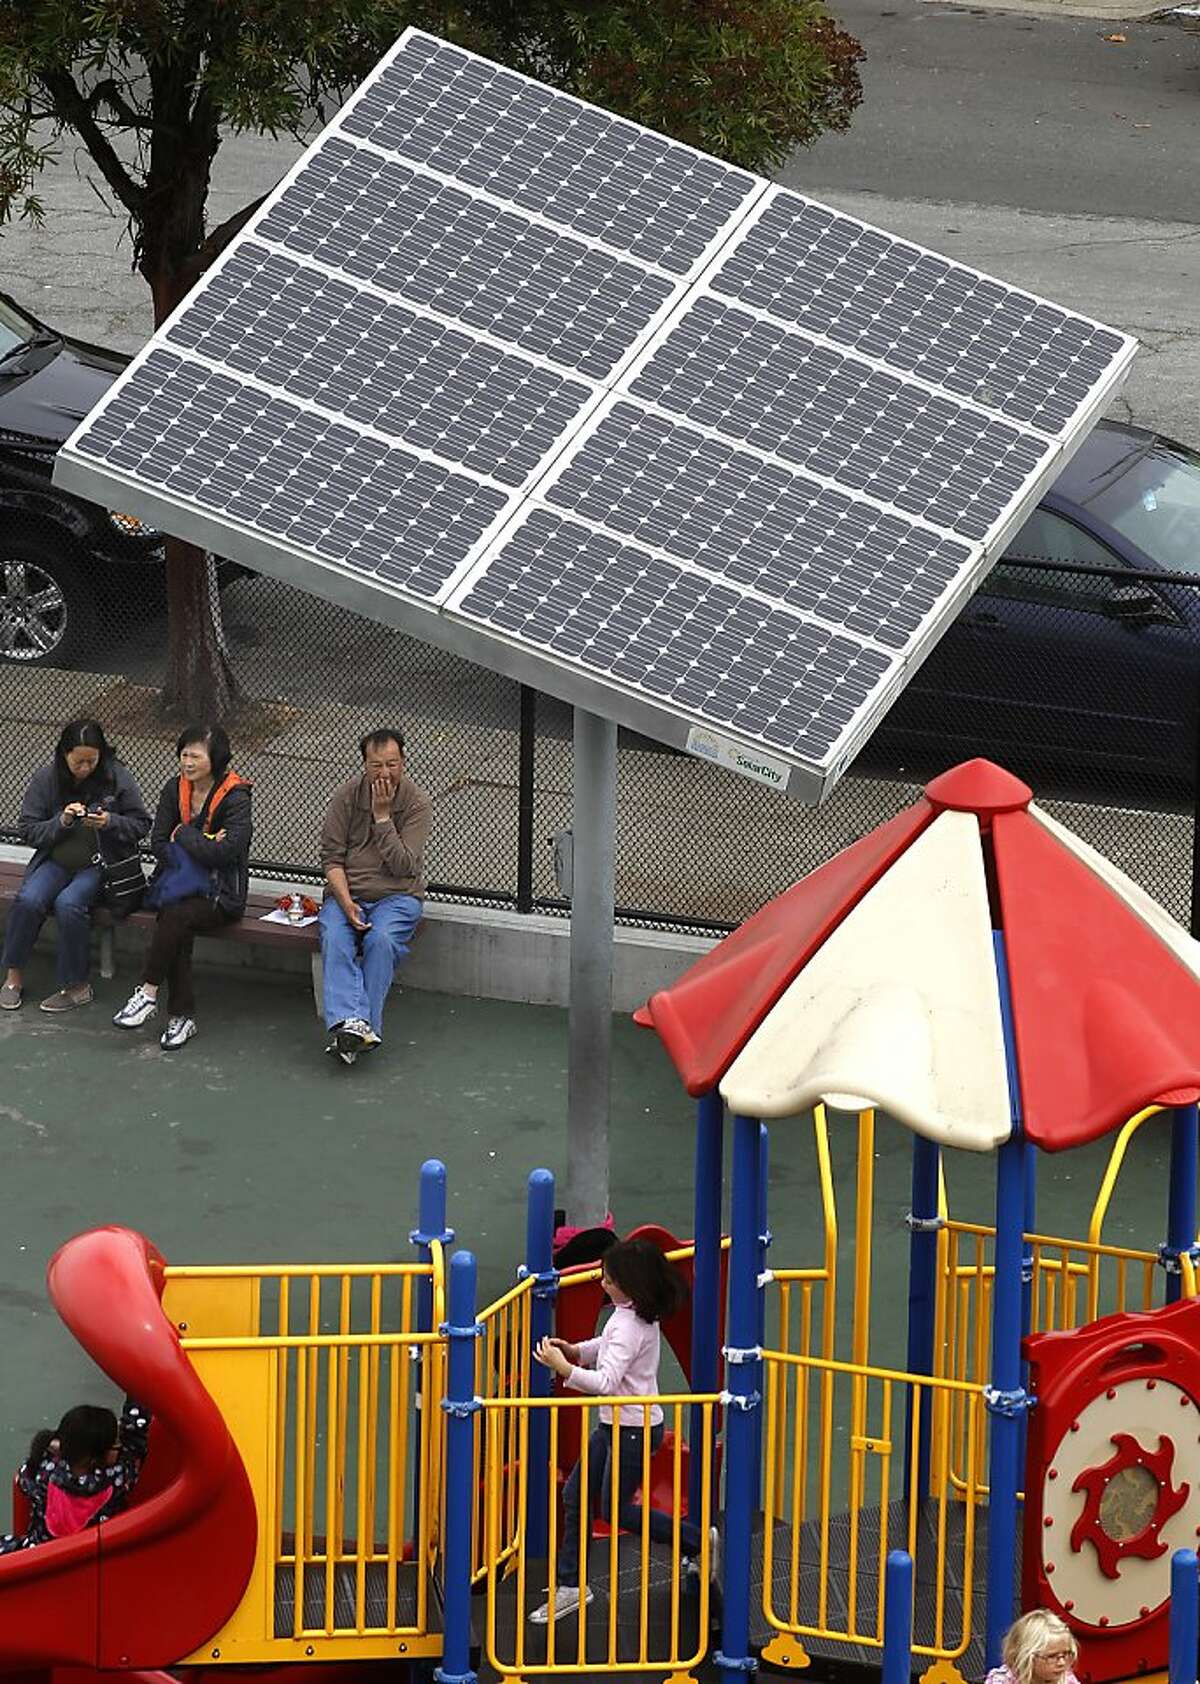 Lawton Alternative a K-8th grade school, on Sturday Sept. 15, 2012, in San Francisco, Calif., has a solar panel installed on the playground area.